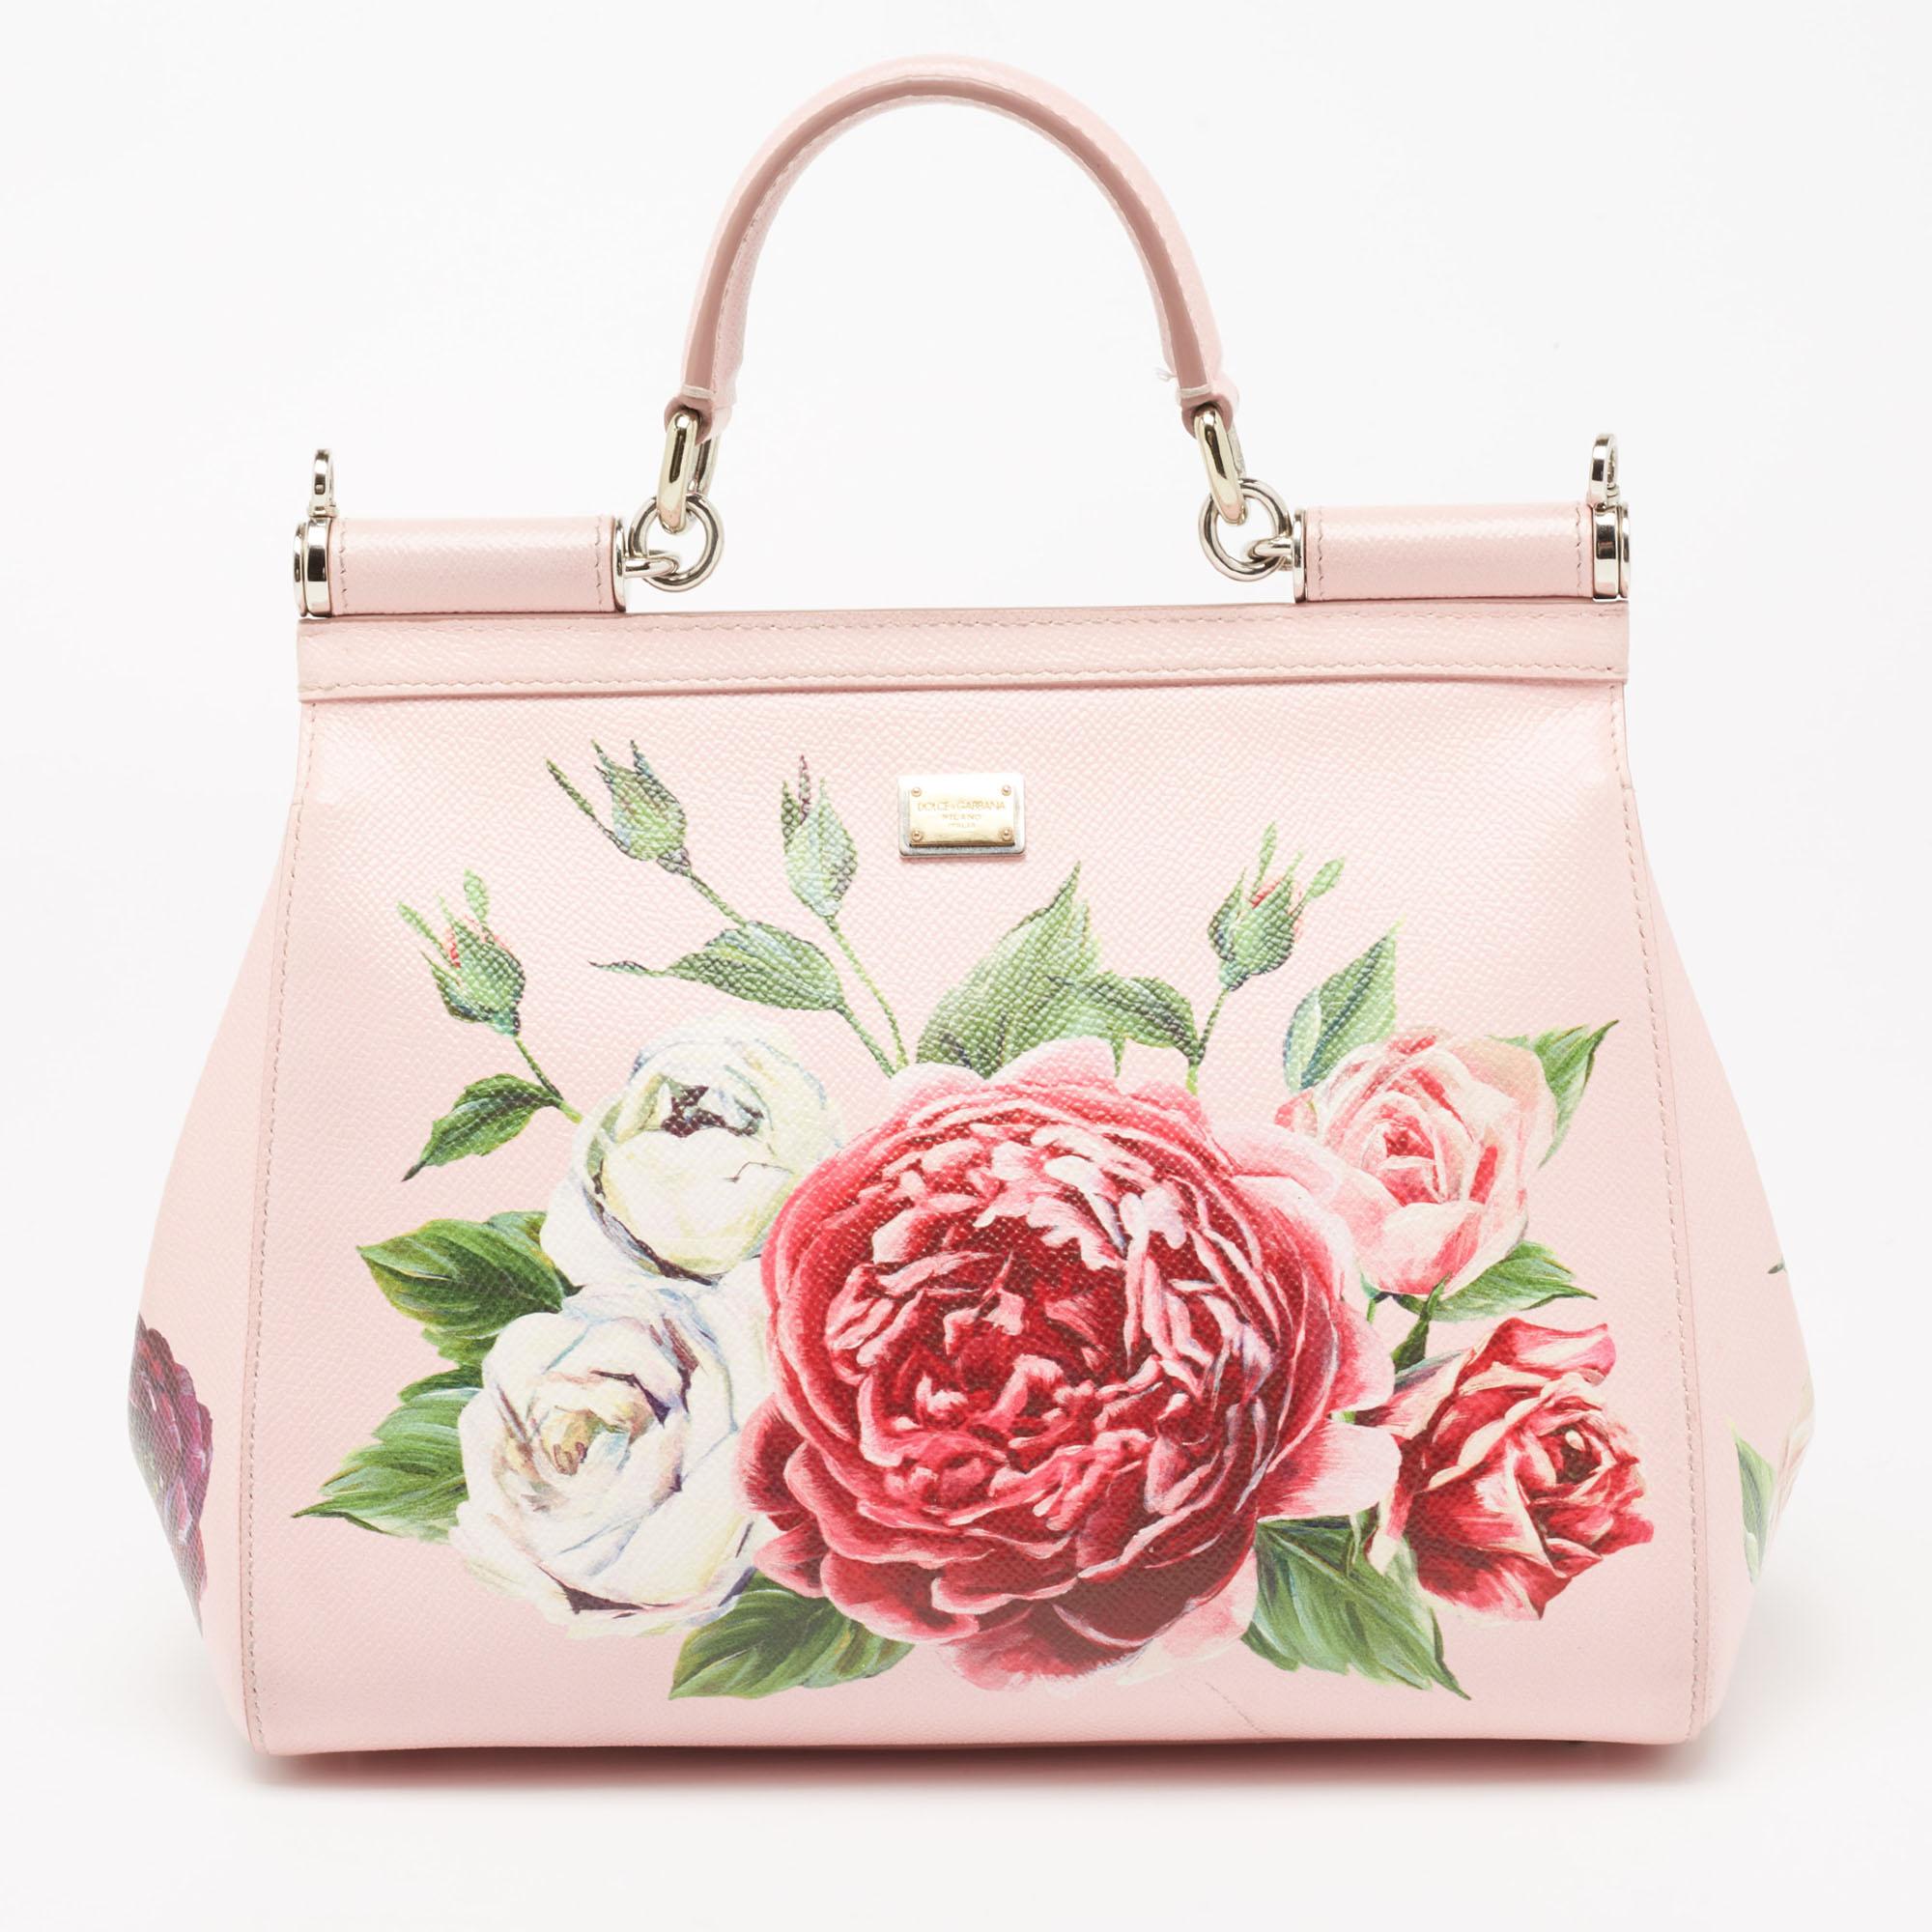 Meticulously crafted into an eye-catchy shape, this Miss Sicily bag from the House of Dolce & Gabbana exudes just the right amount of charm and elegance! It is made from pink floral-printed leather on the exterior. It has a fabric-lined interior,